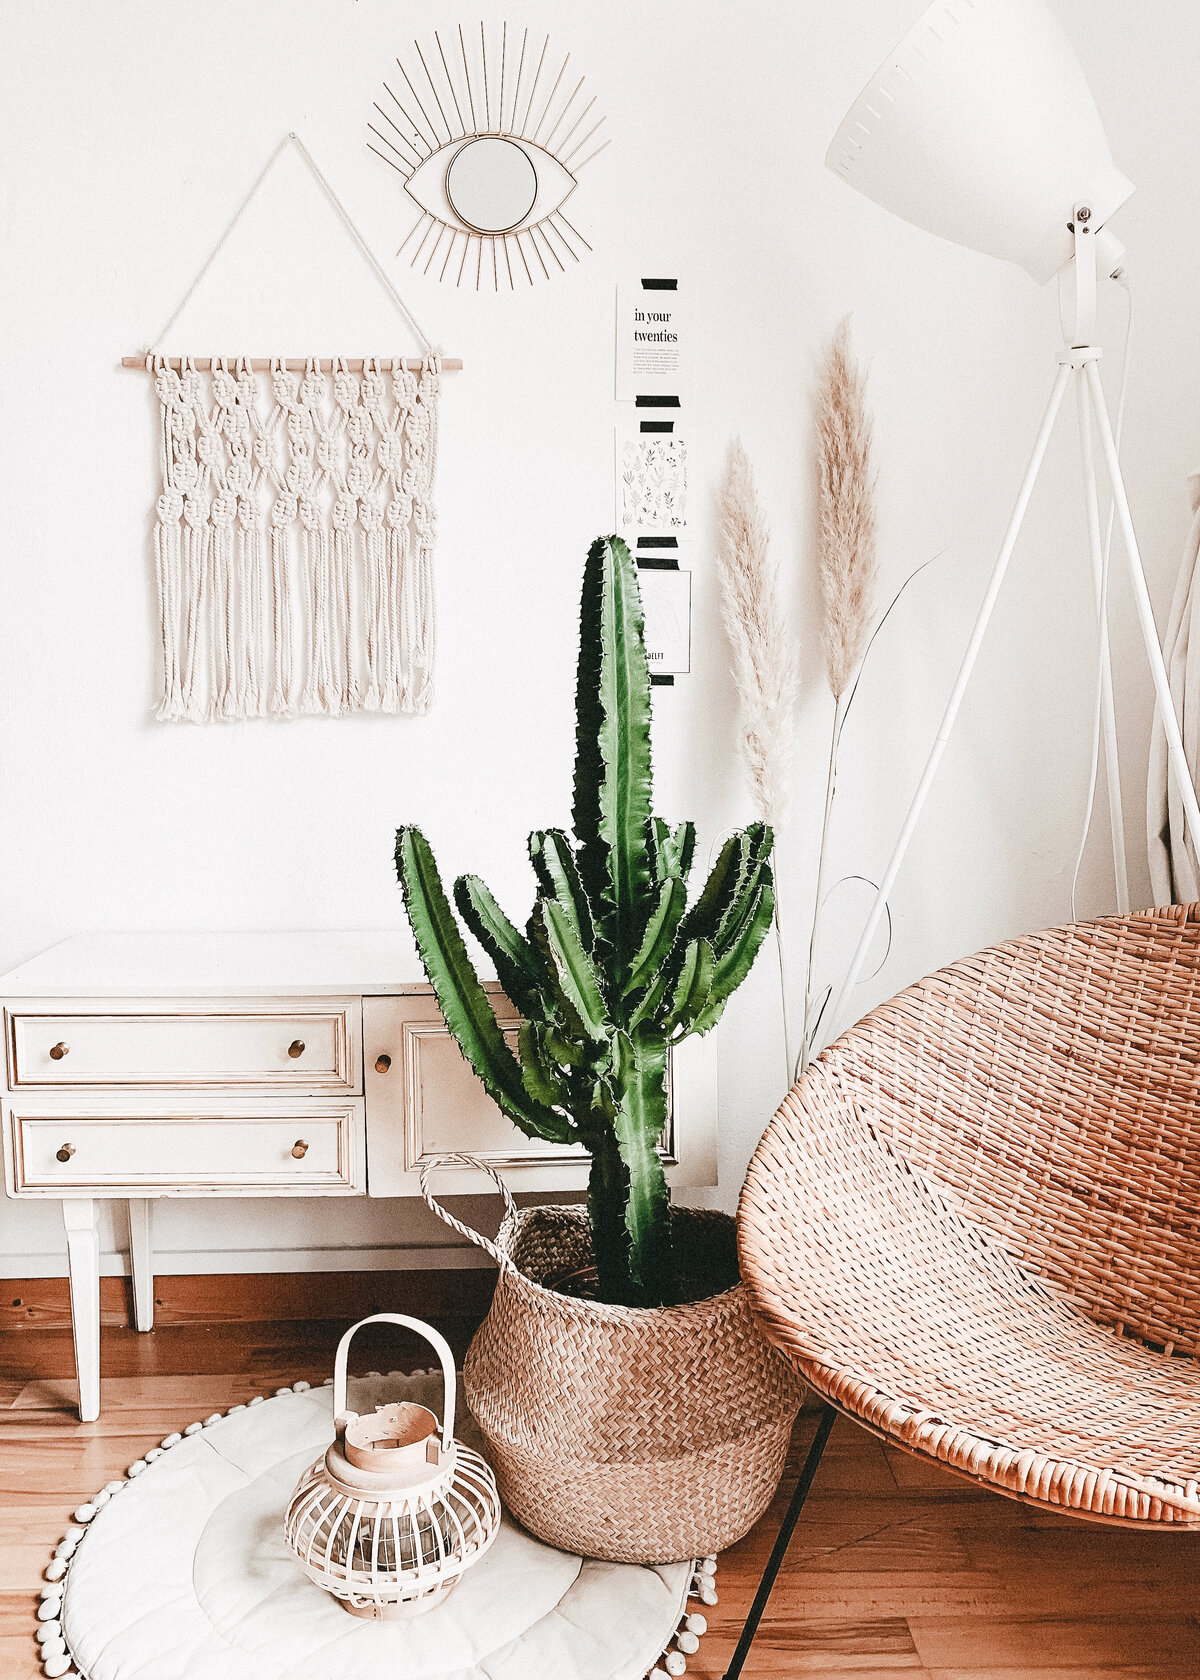 An interior photograph featuring a boho rattan chair, with macrame wall hanging and a cactus in a basket.